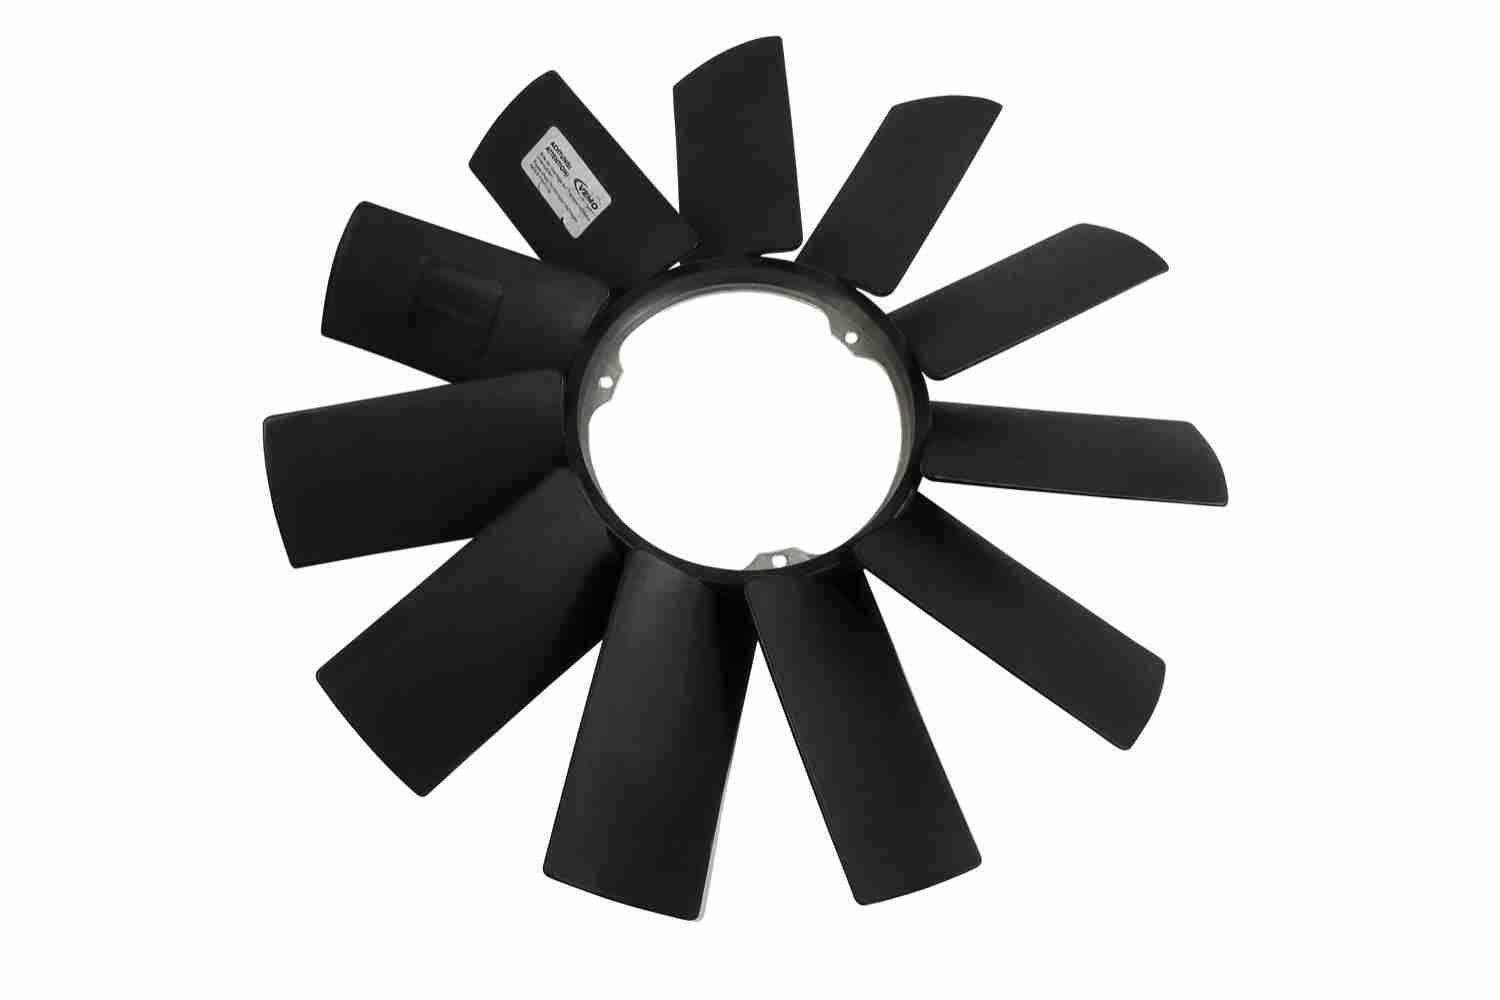 Original V20-90-1108 VEMO Fan wheel, engine cooling experience and price